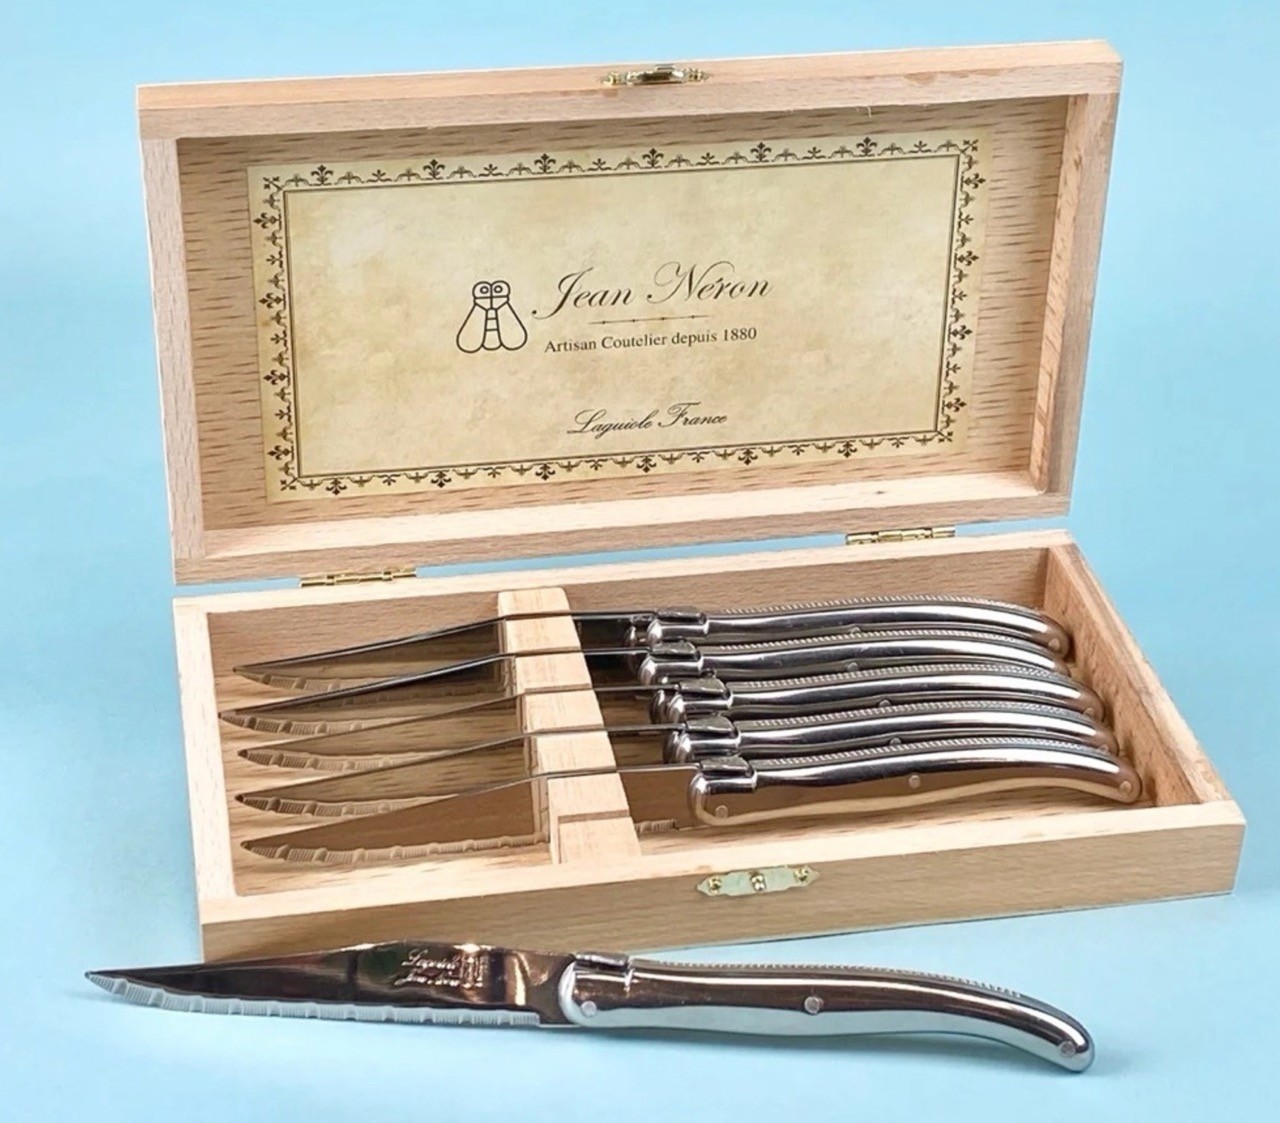 Laguiole Platine Stainless Steel Knives In Wooden Presentation Box (Set of 6)